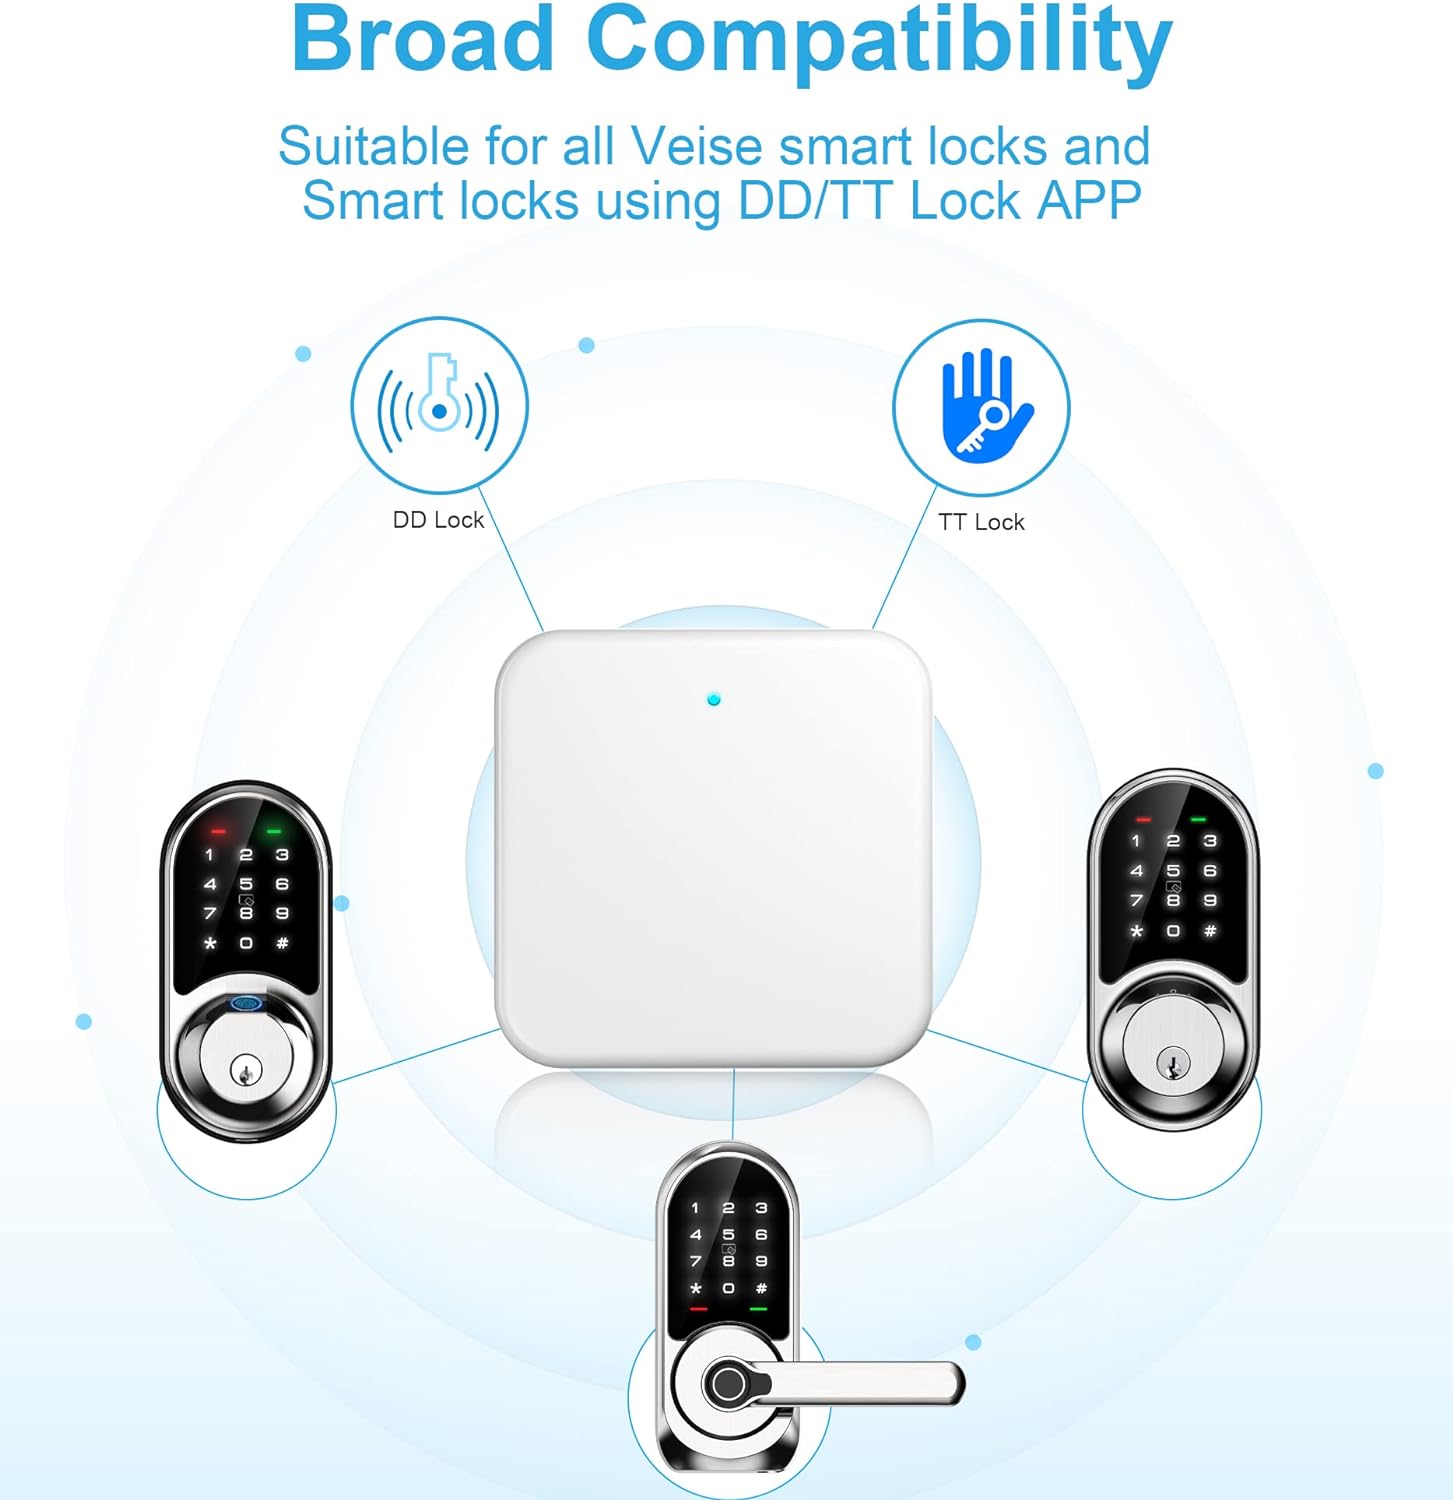 Veise G2 Gateway, Smart Lock WiFi Gateway, Paired with Smart Door Lock to Realize APP Remote Control, Compatible with DD Lock APP and TT Lock APP